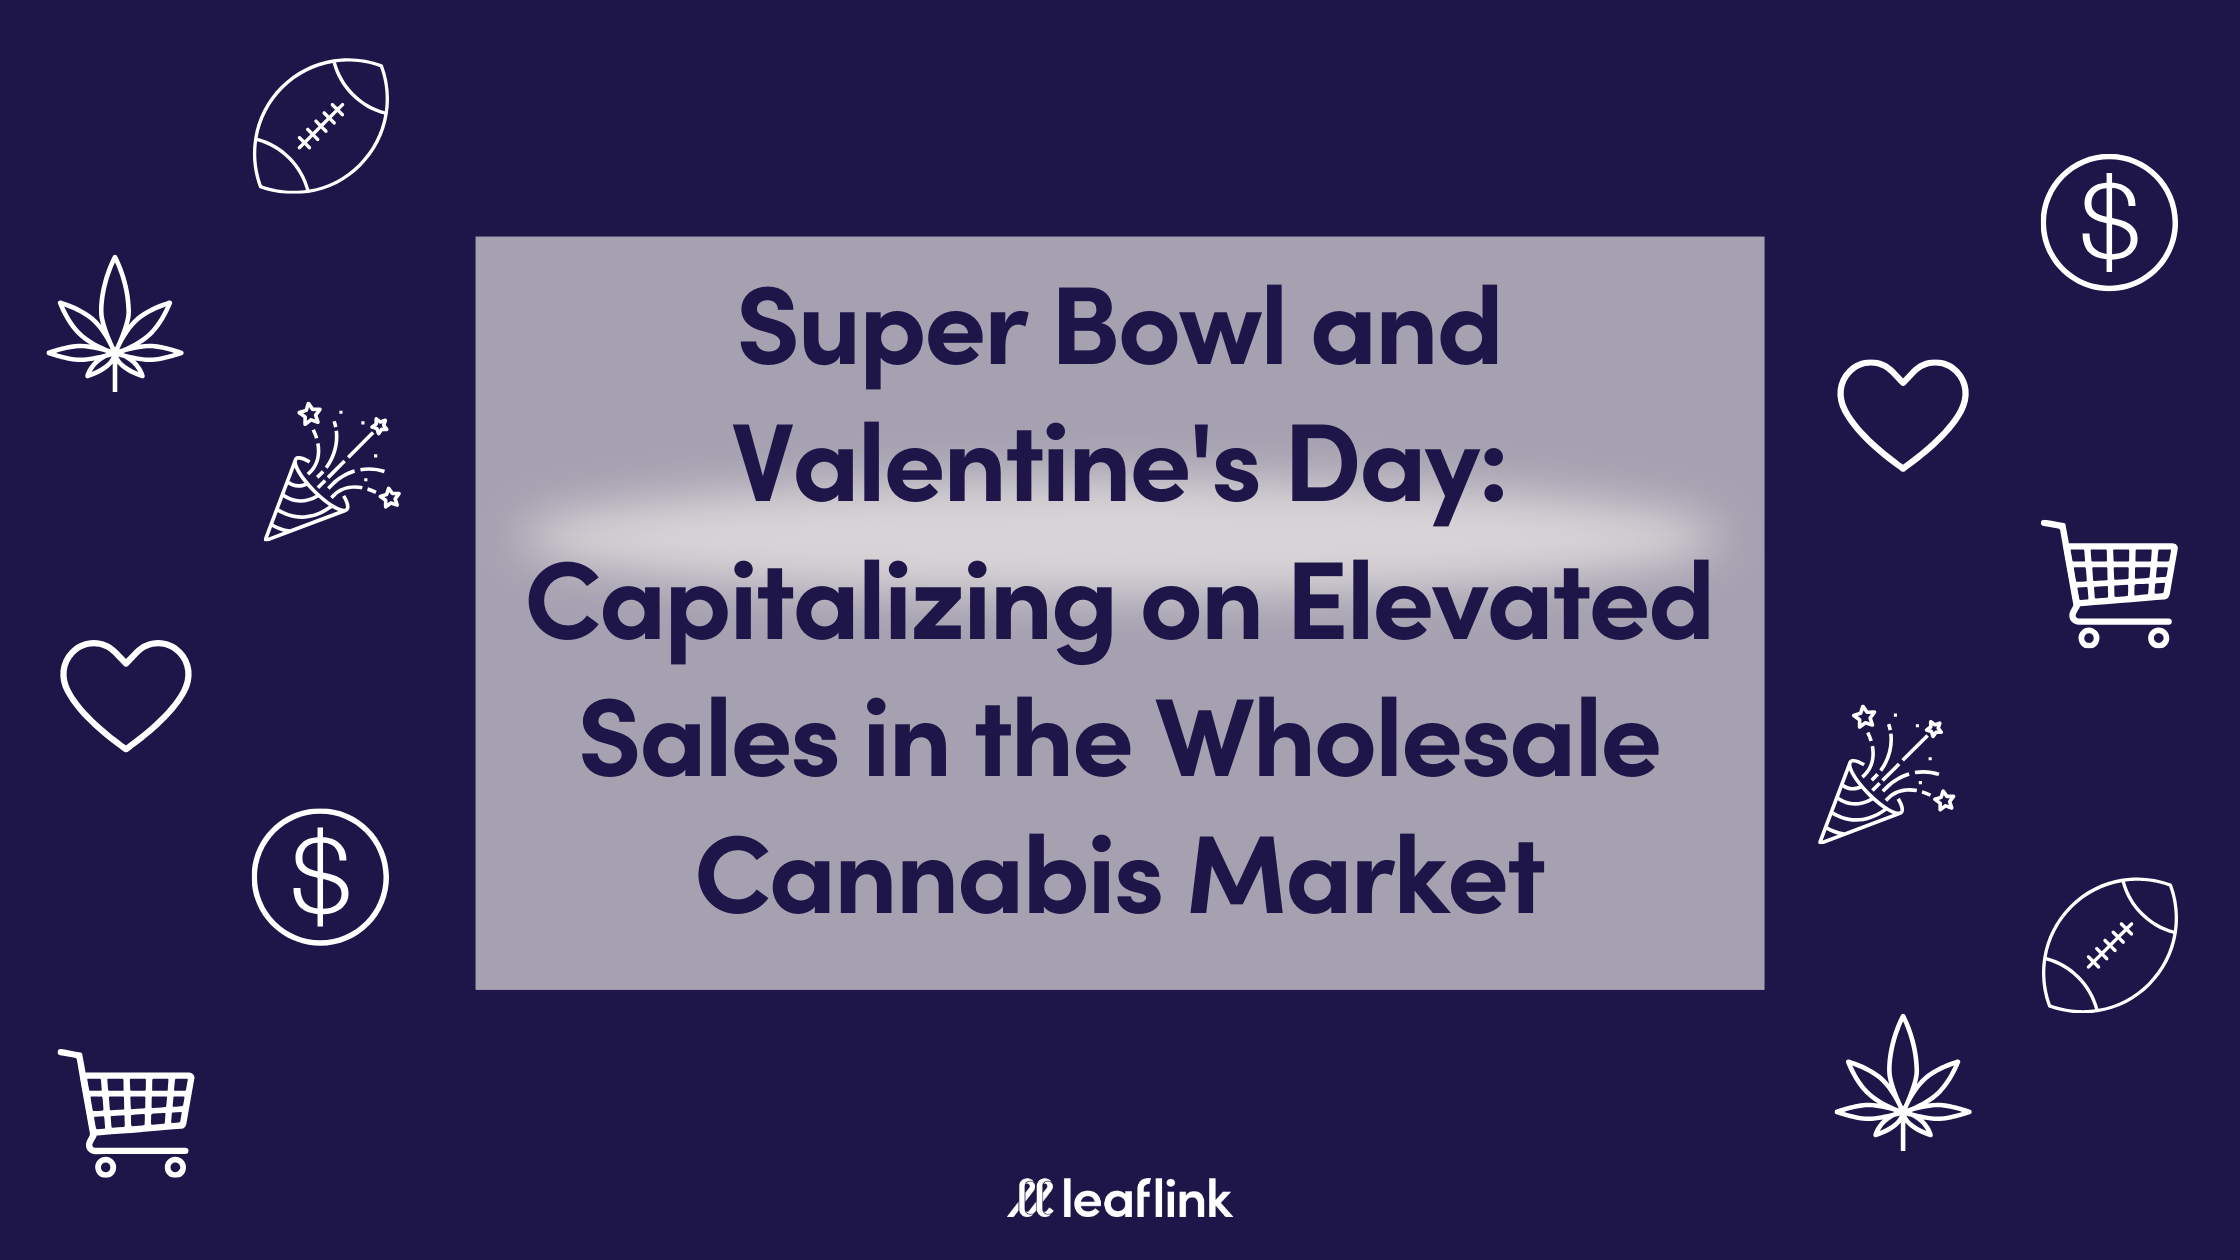 Super Bowl and Valentine’s Day: Capitalizing on Elevated Sales in the Wholesale Cannabis Market